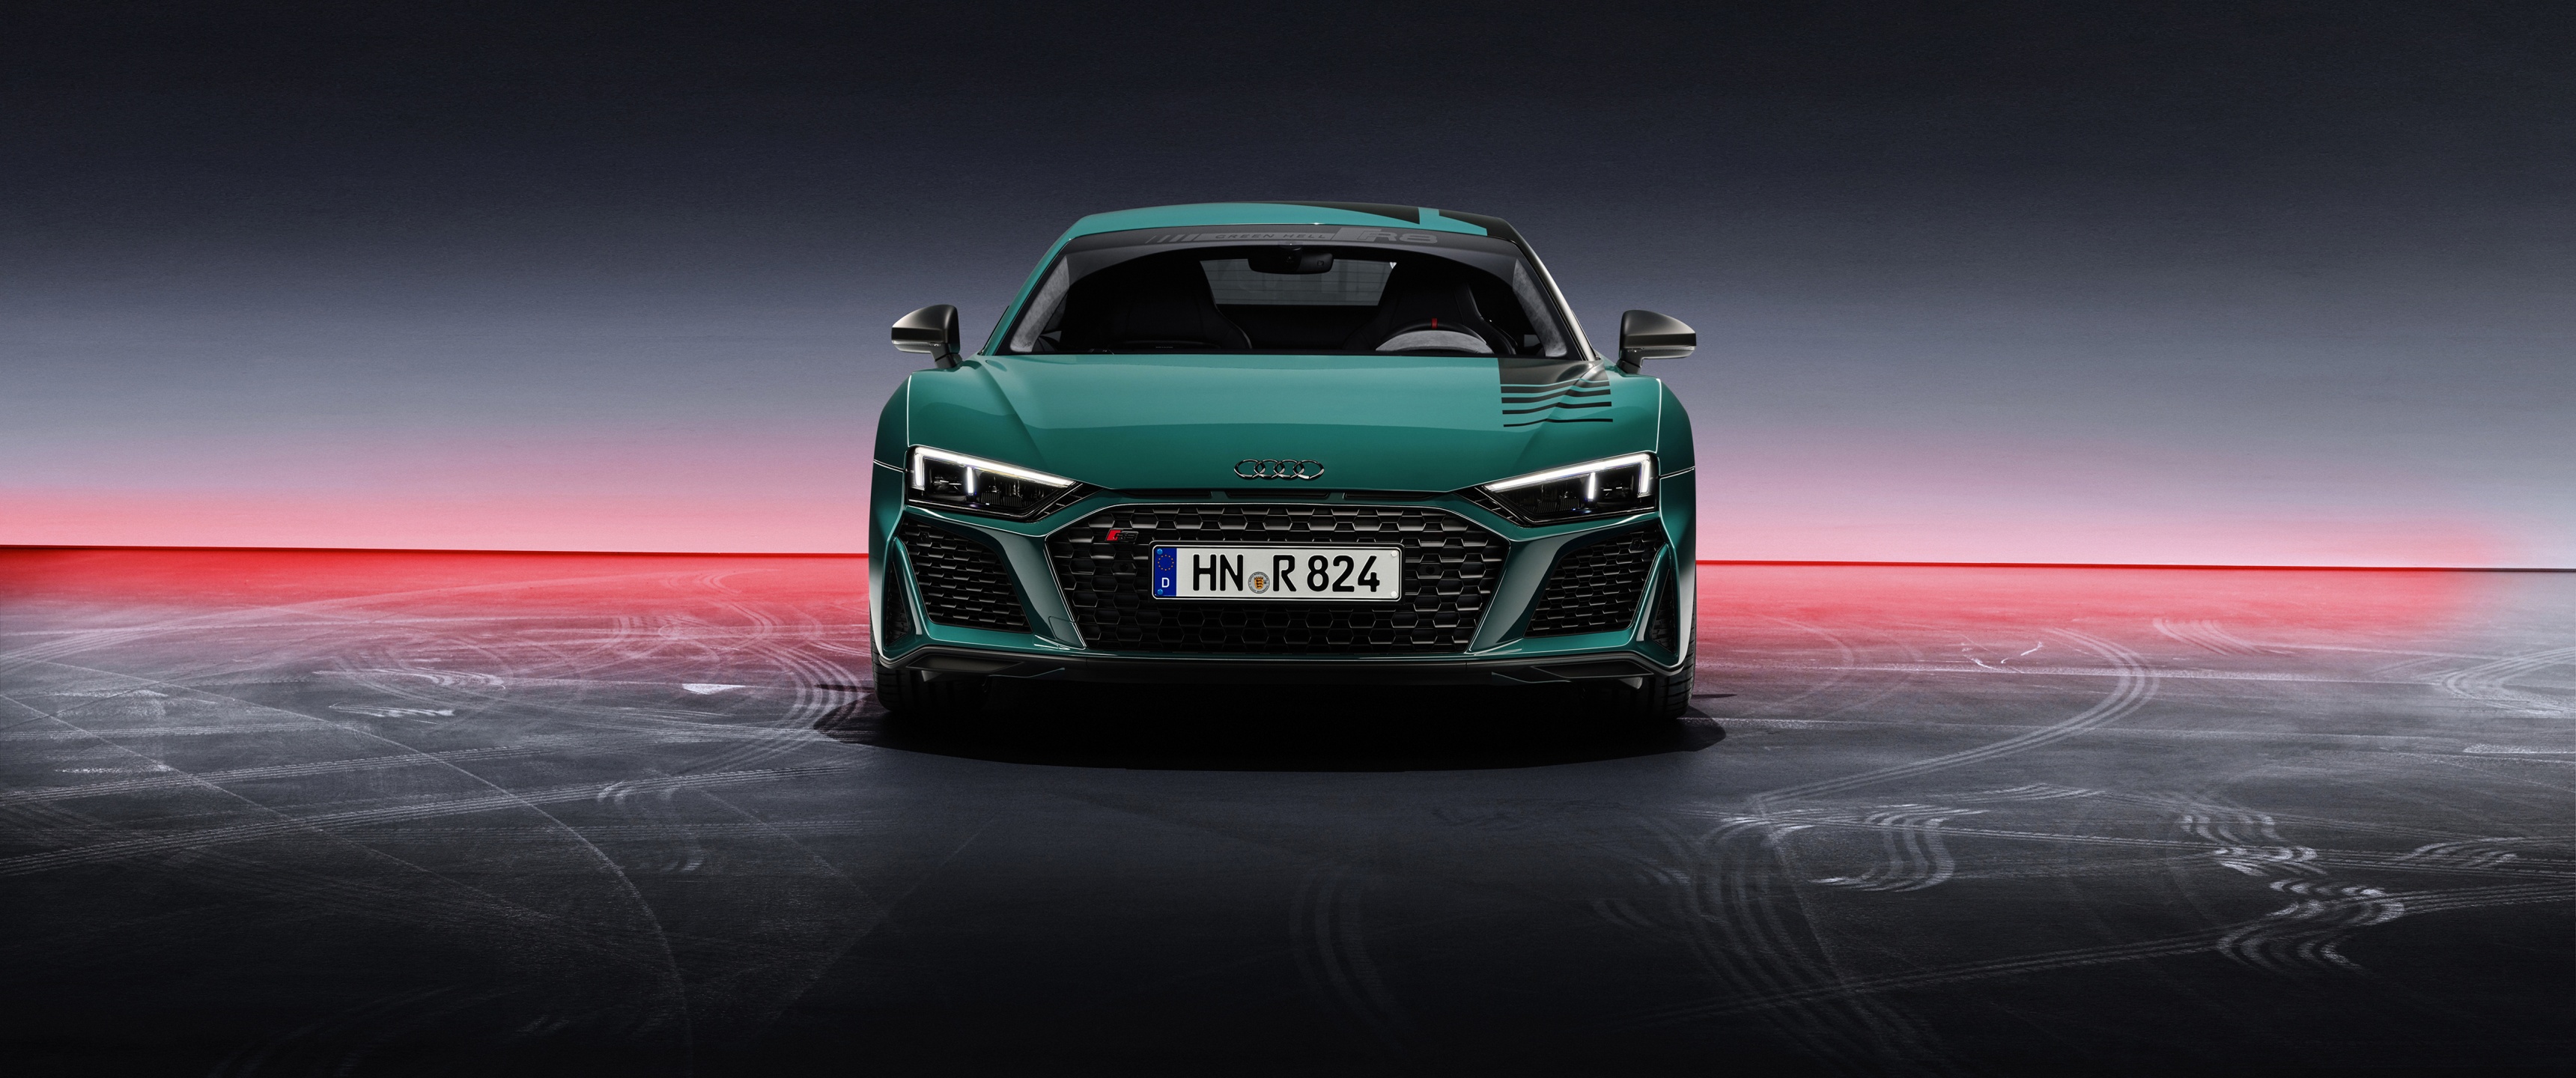 Audi R8 Green Hell Wallpaper 4k Limited Edition Supercars 2021 5k Cars 2772